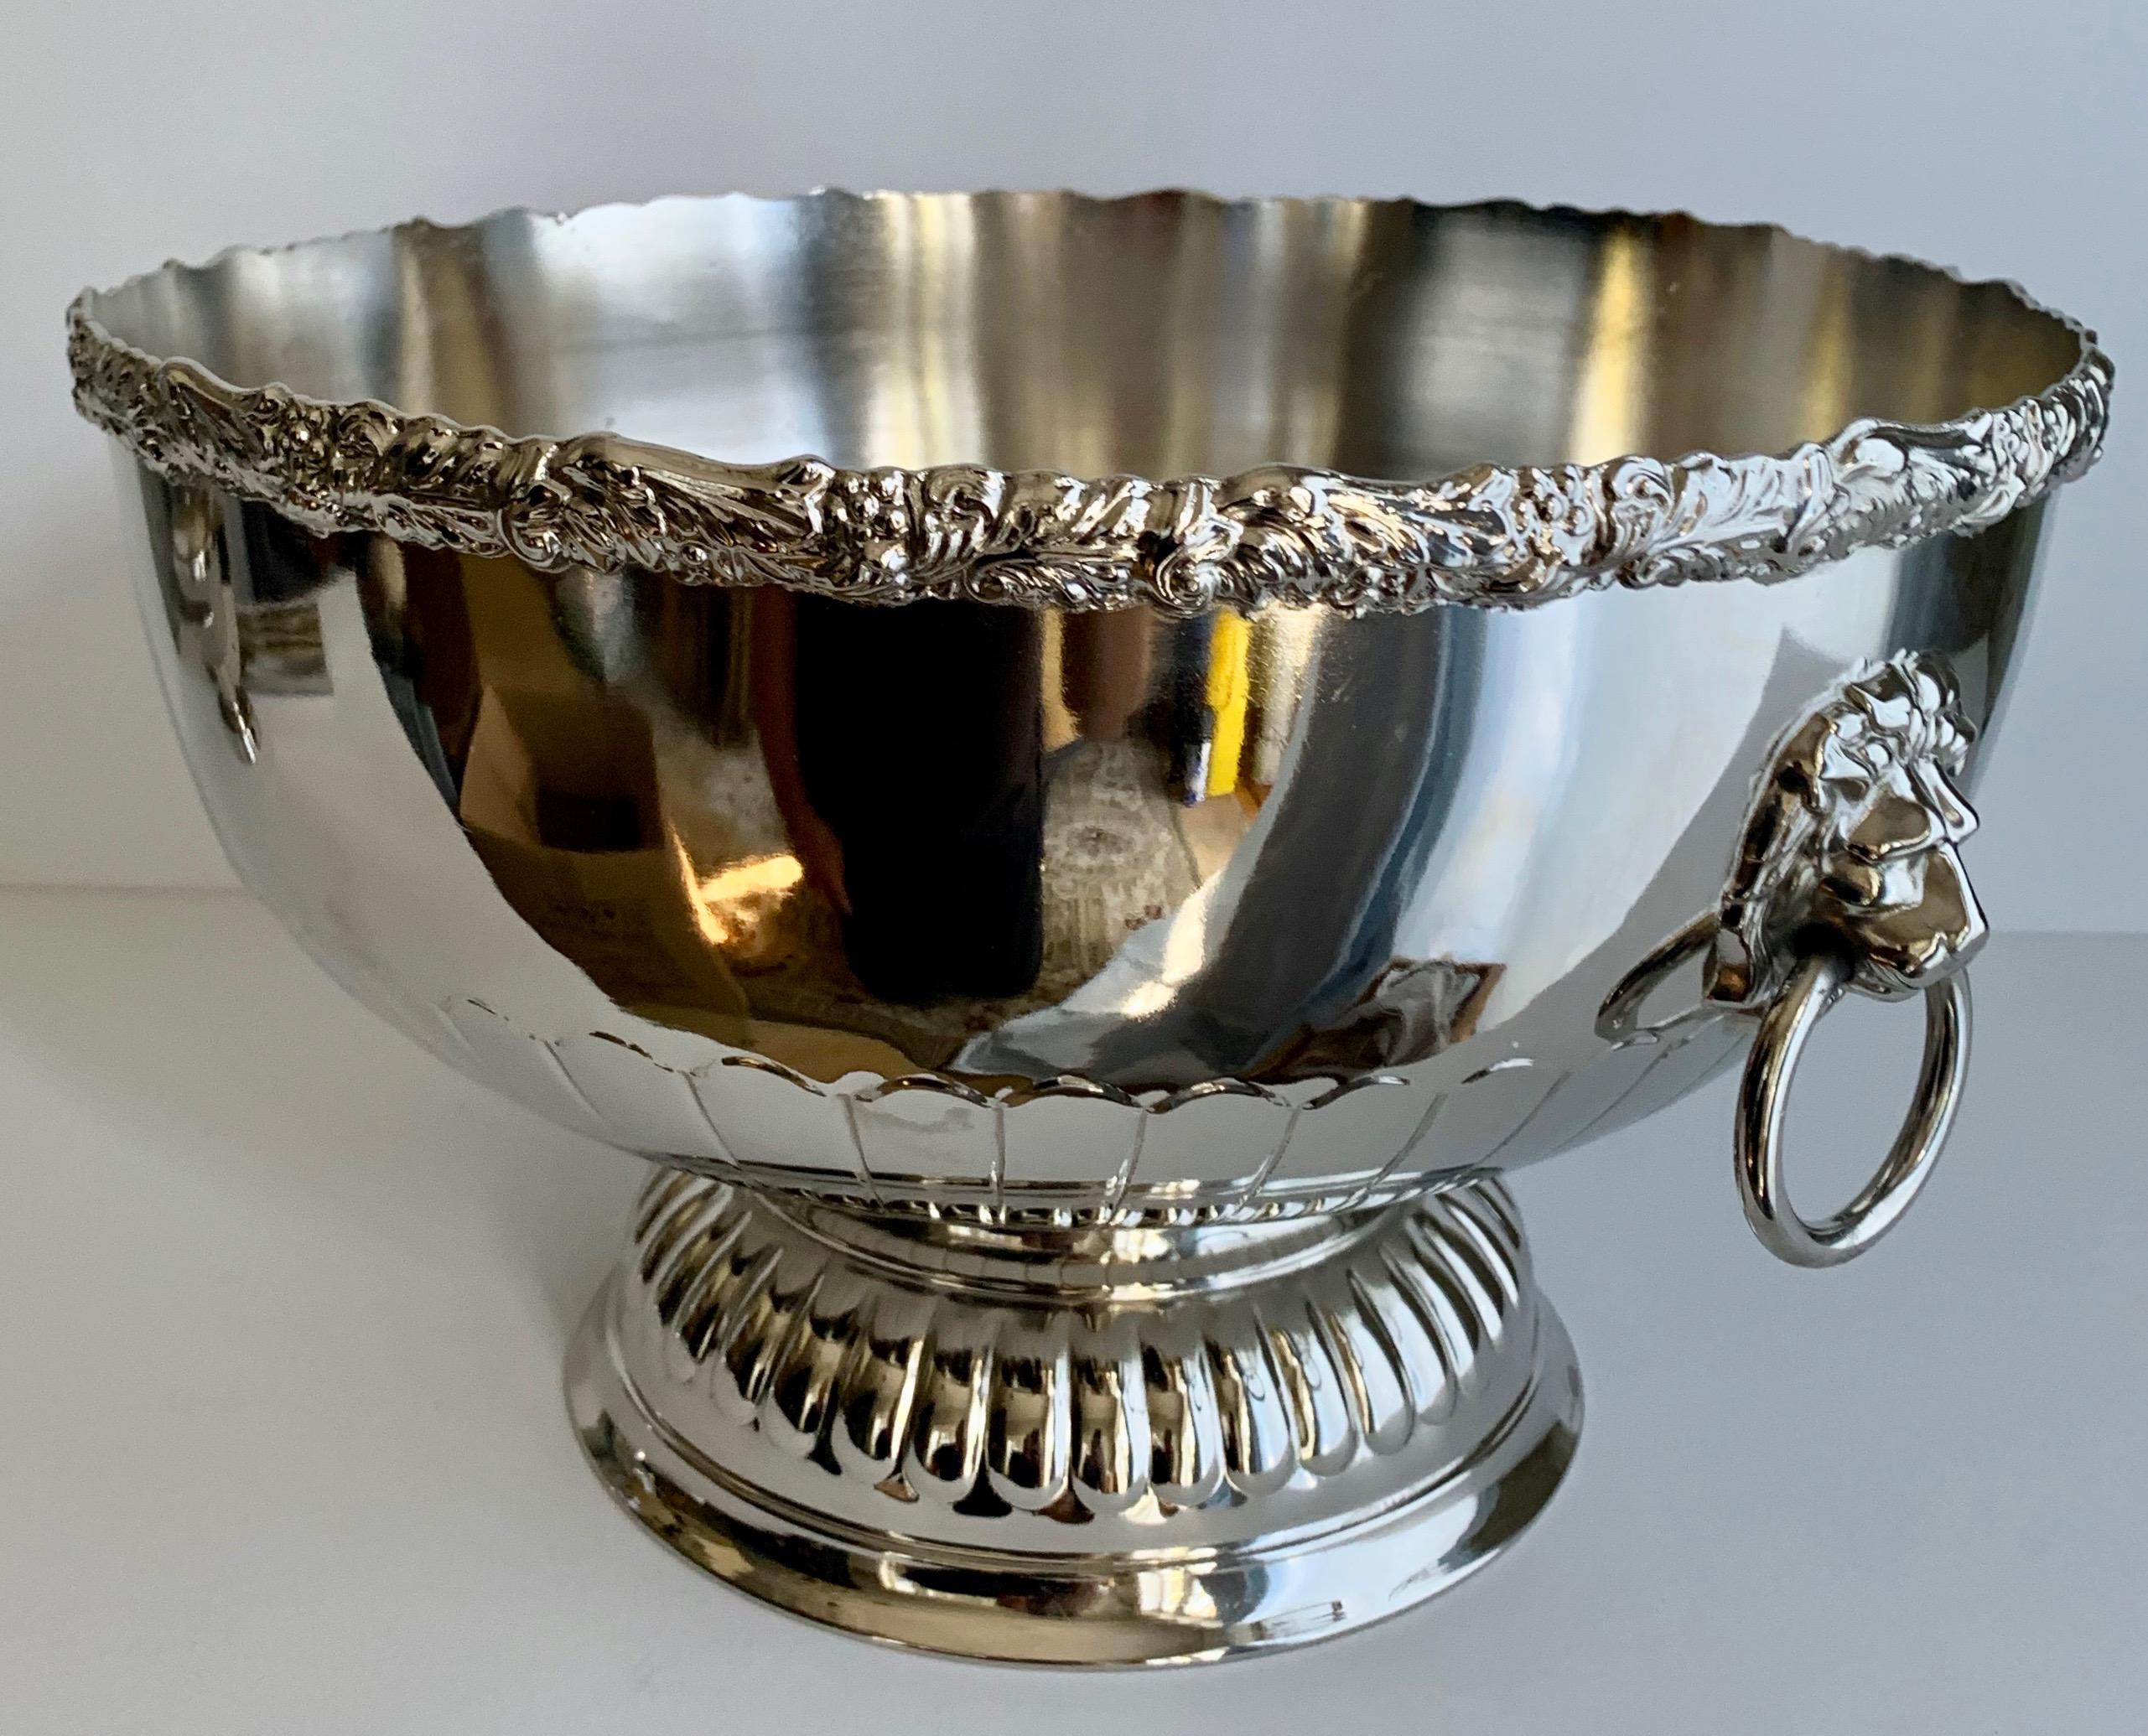 English silver punch bowl with rim and lion handle details - freshly plated punch bowl, silver over copper, made in England. Stamped on Bottom.

A handsome bowl for punch, cooling Champagne or a wonderful holder for flowers or fruit on any table -